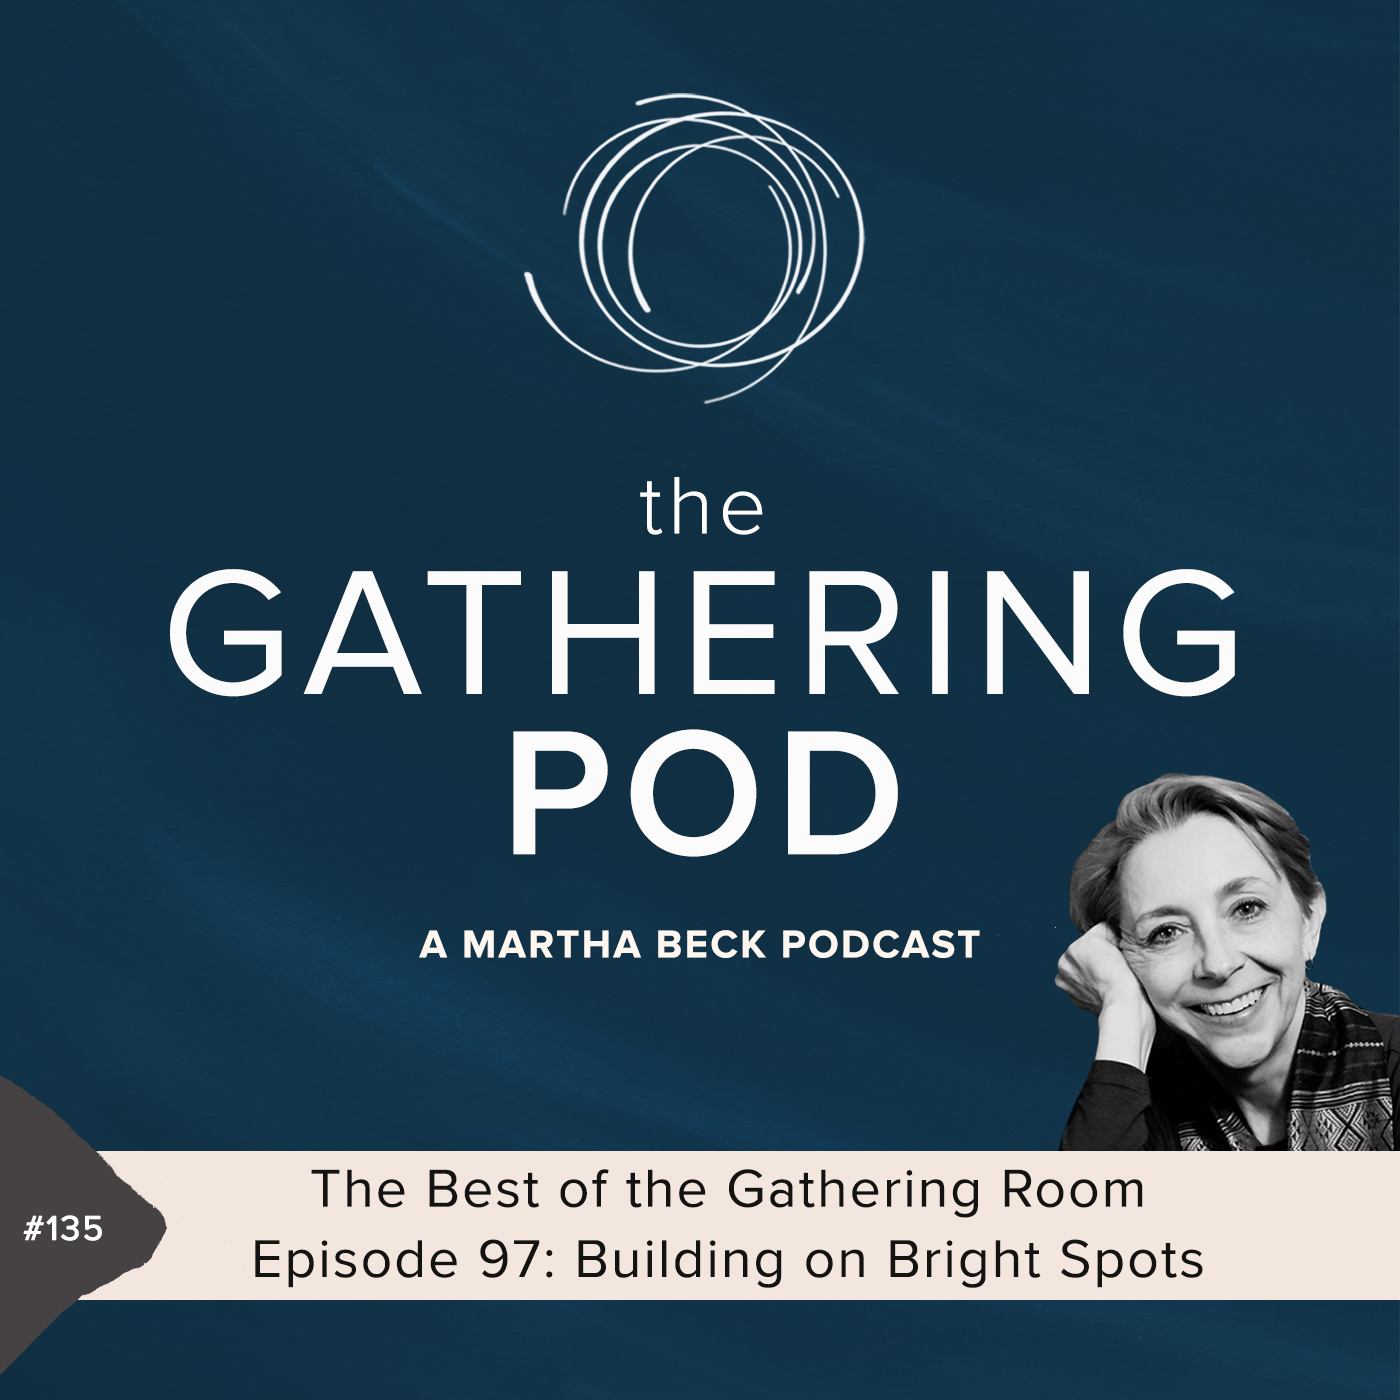 Image for The Gathering Pod A Martha Beck Podcast Episode #135 The Best of the Gathering Room – Episode 97: Building on Bright Spots